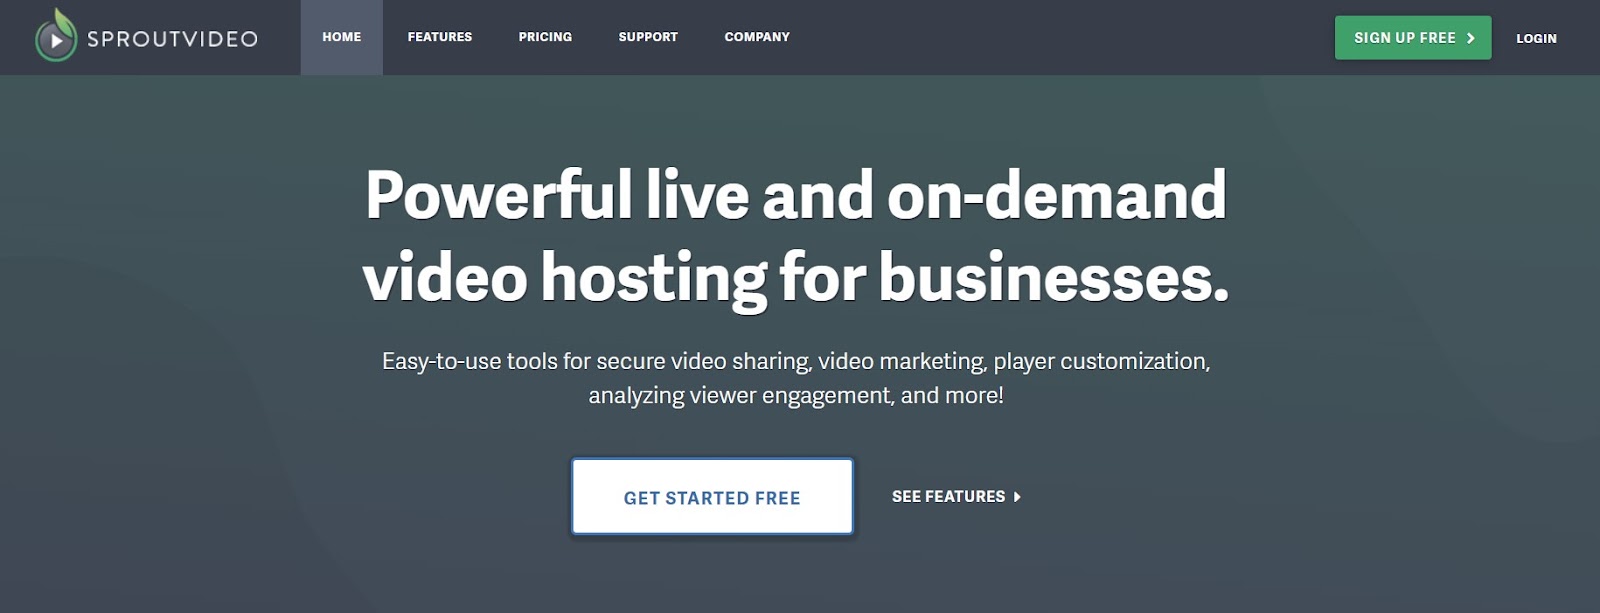 best streaming services platform SproutVideo